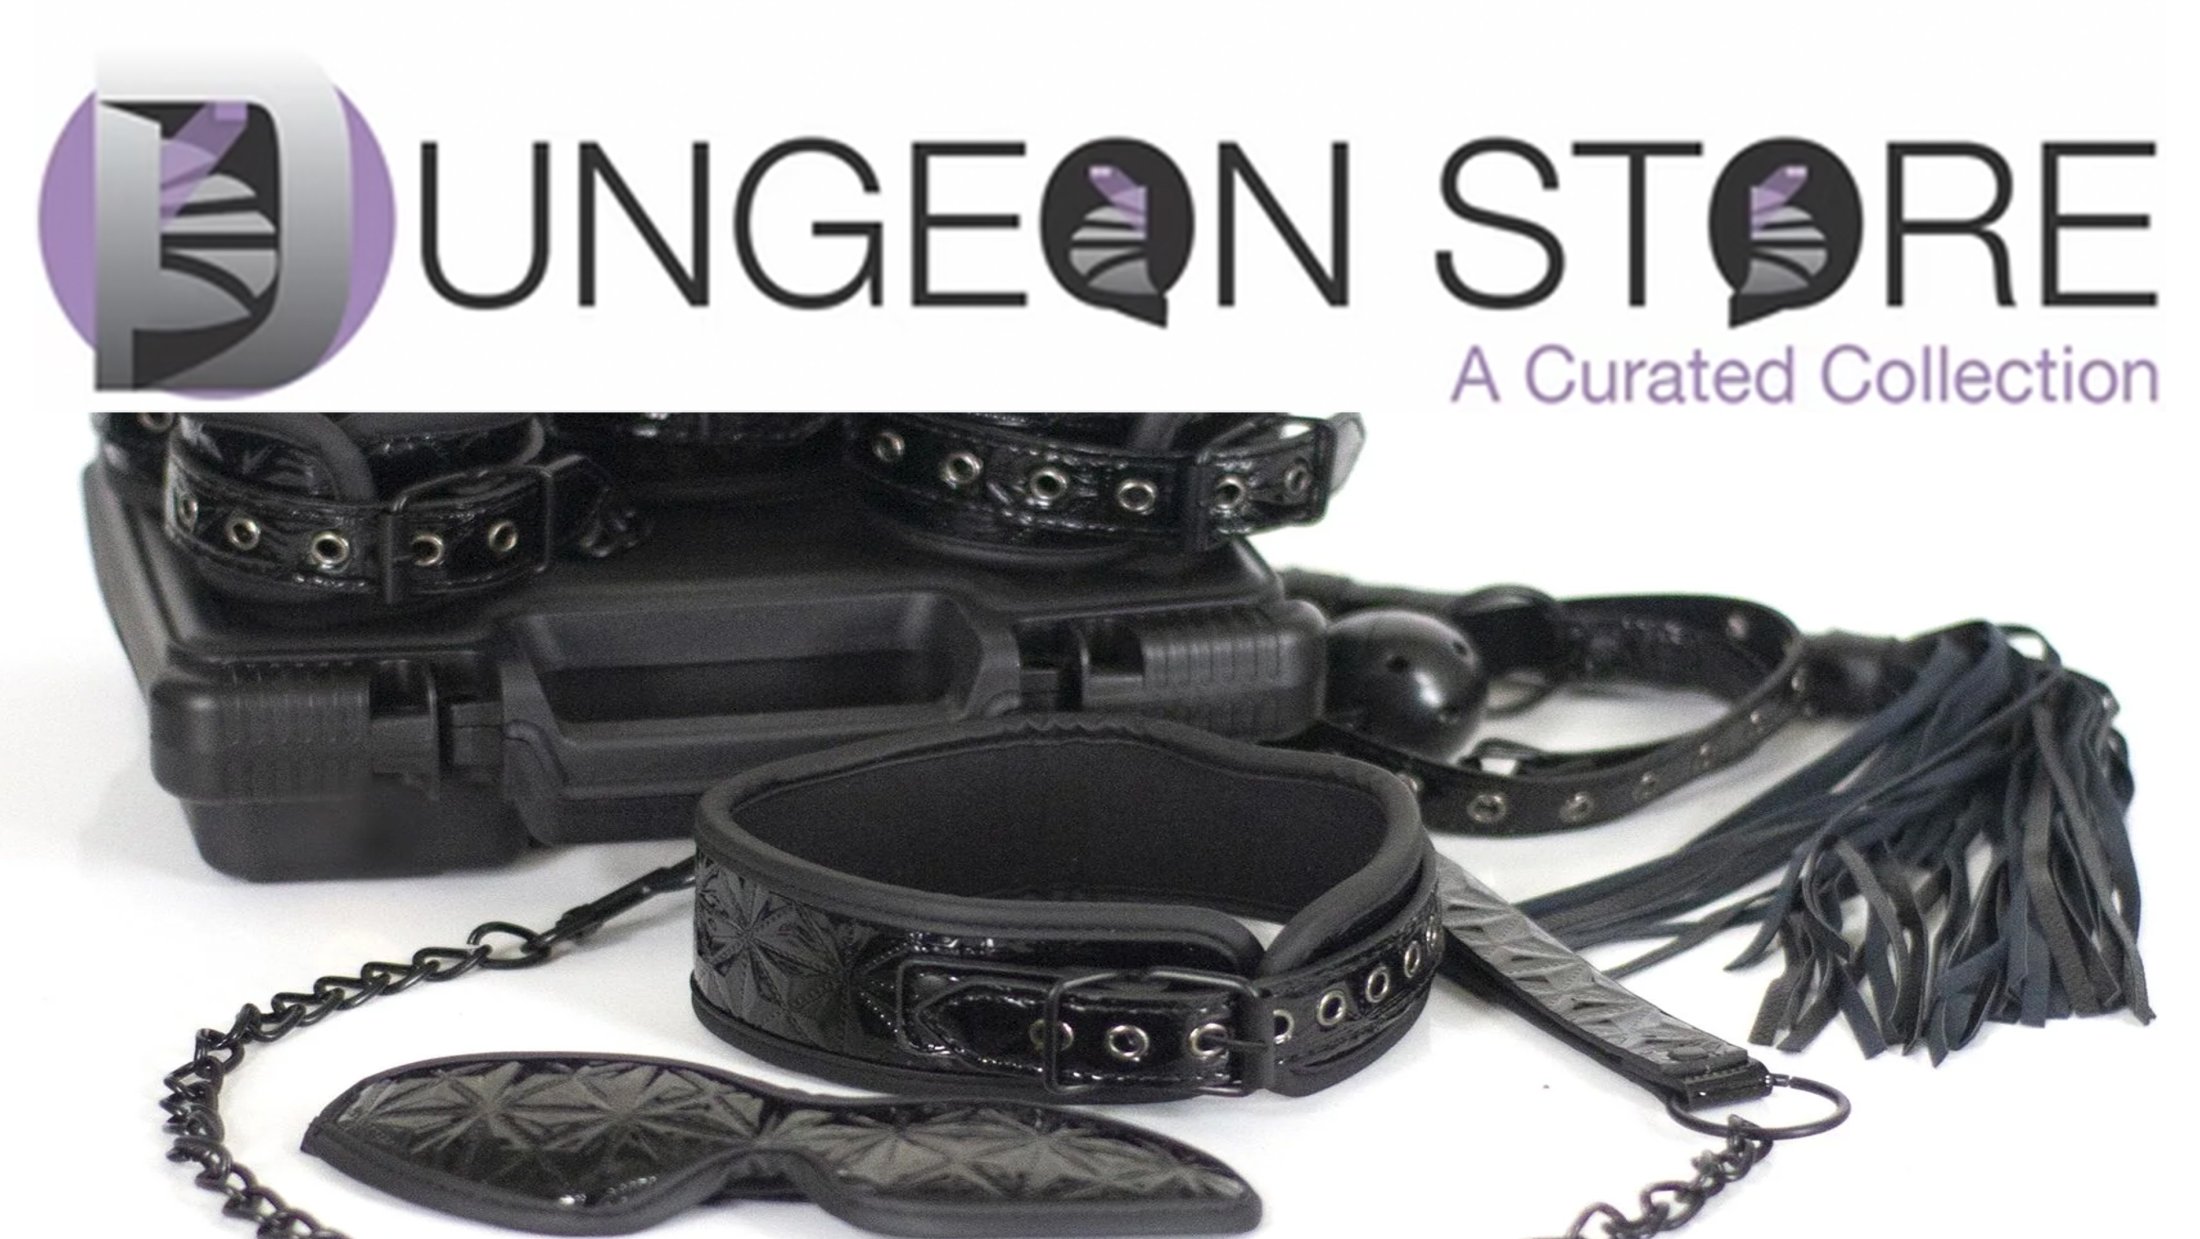 The Dungeon Store